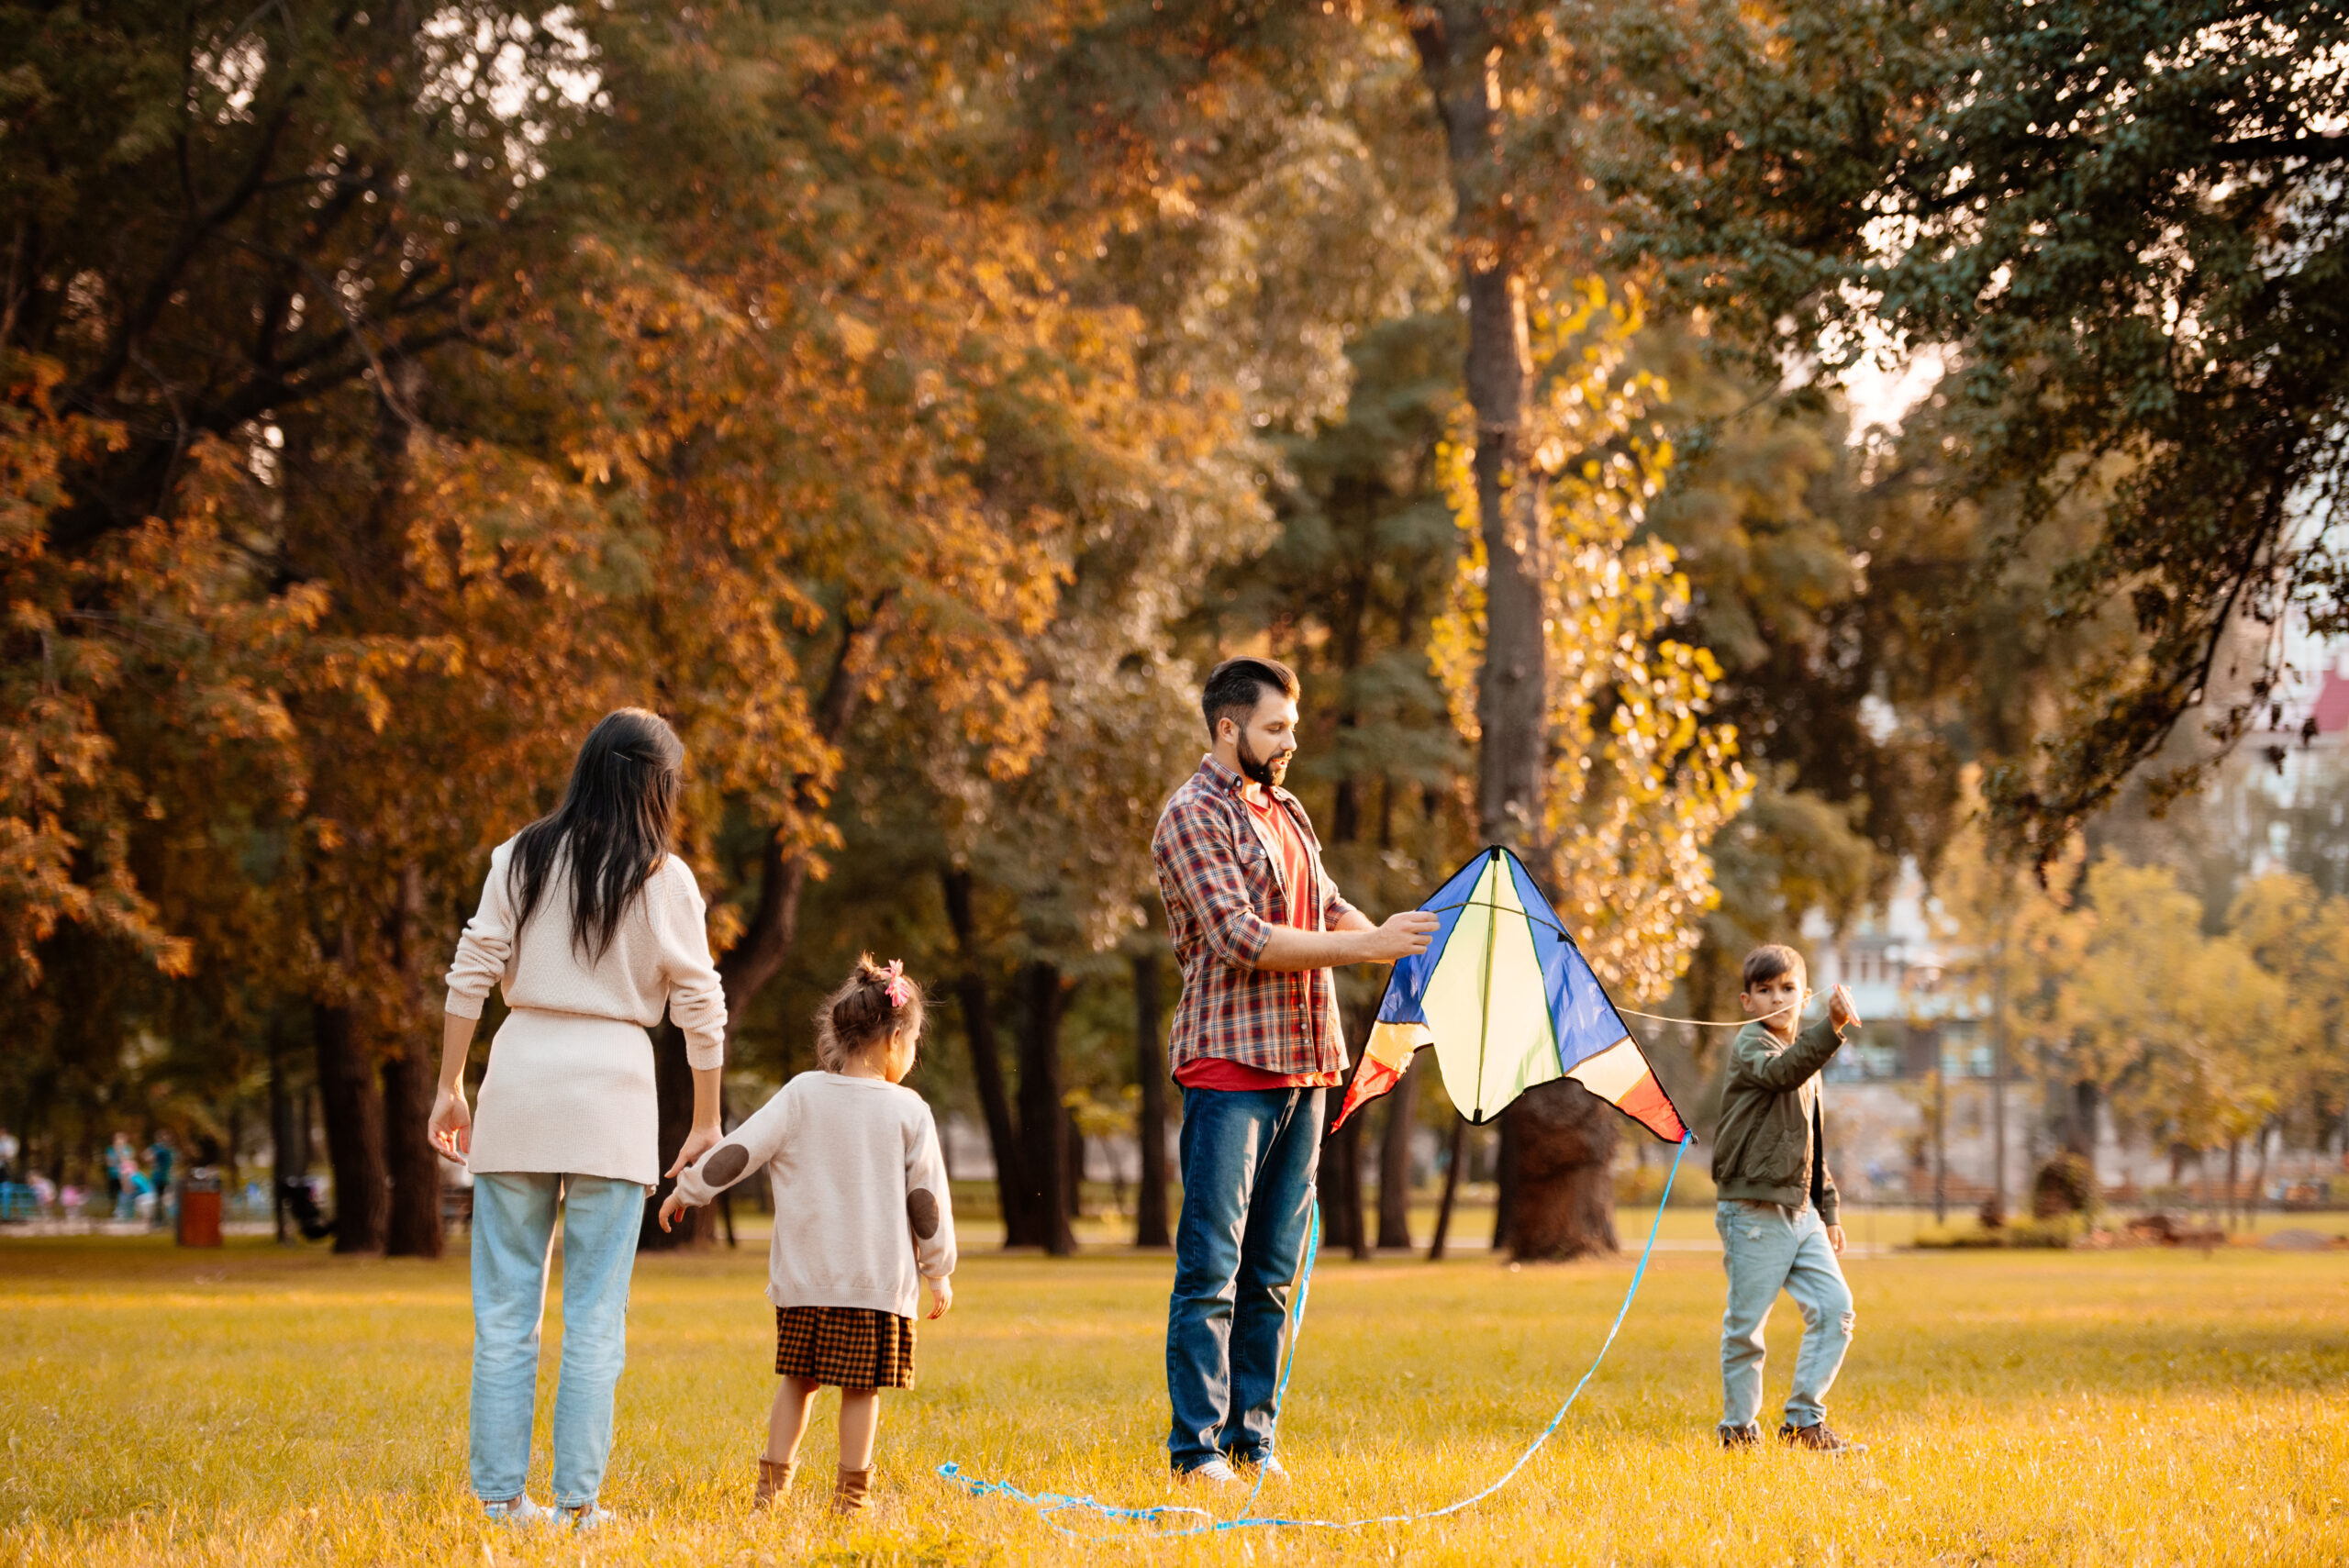 Family with children trying to fly a kite in an autumn park